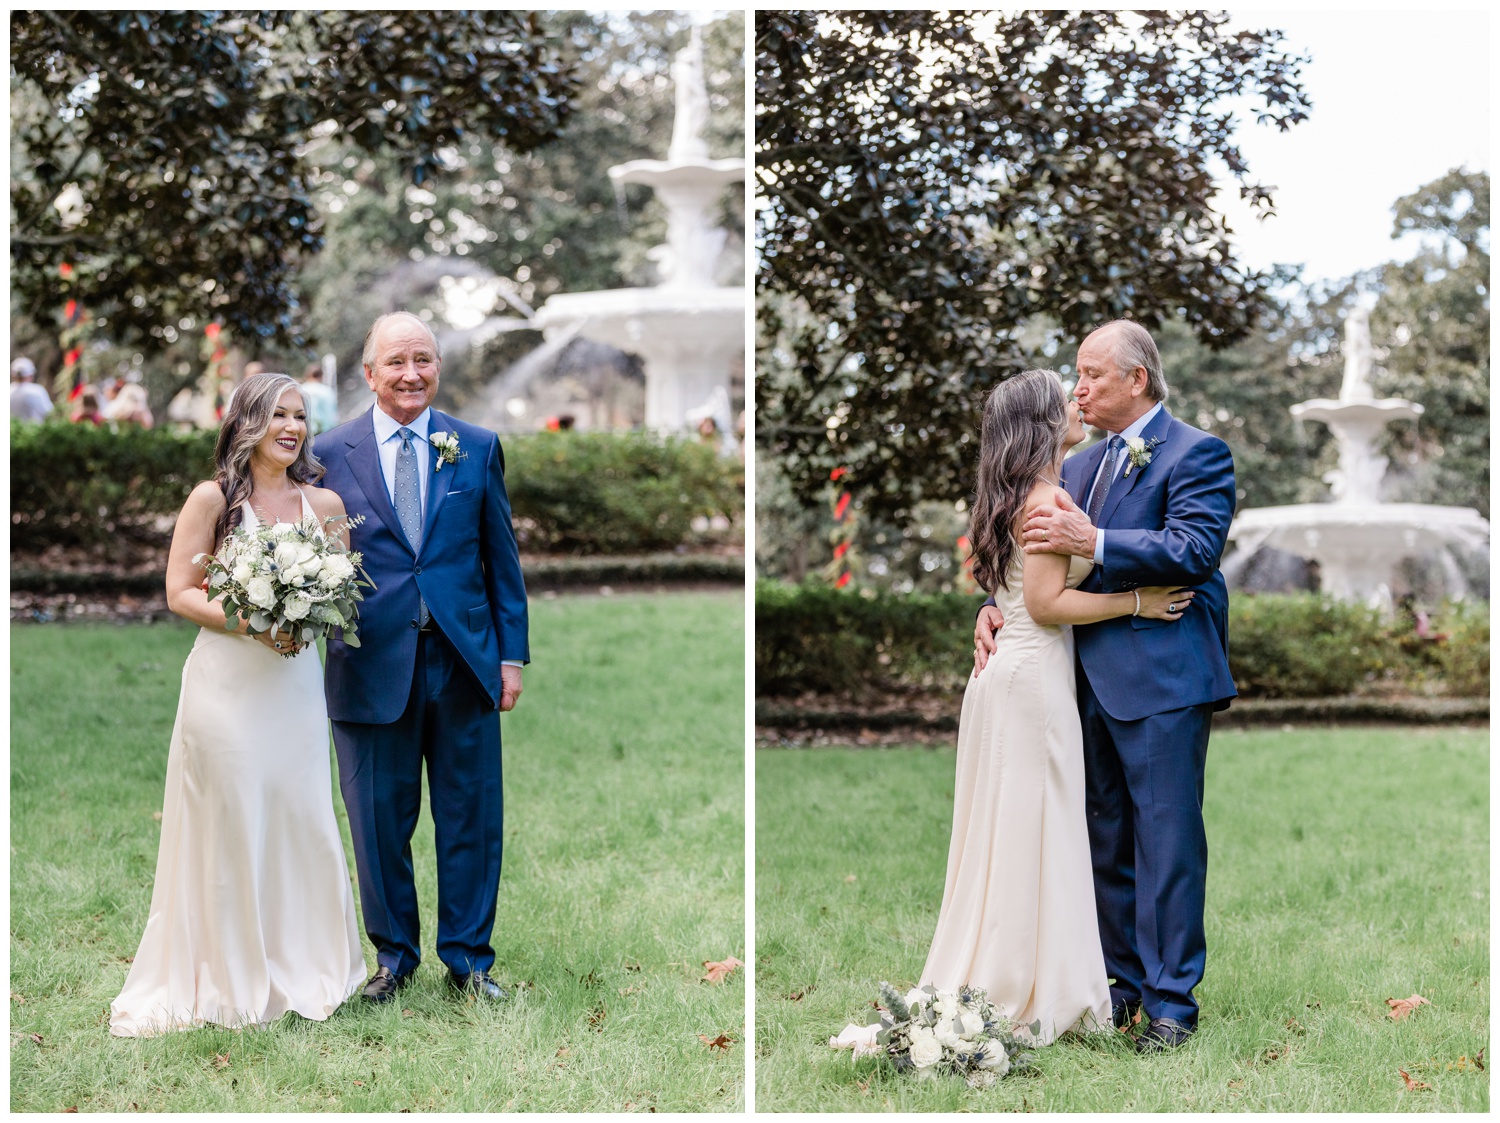 Elopement at The Fountain - Denise + Mike - apt b photography - flowers by ivory and beau